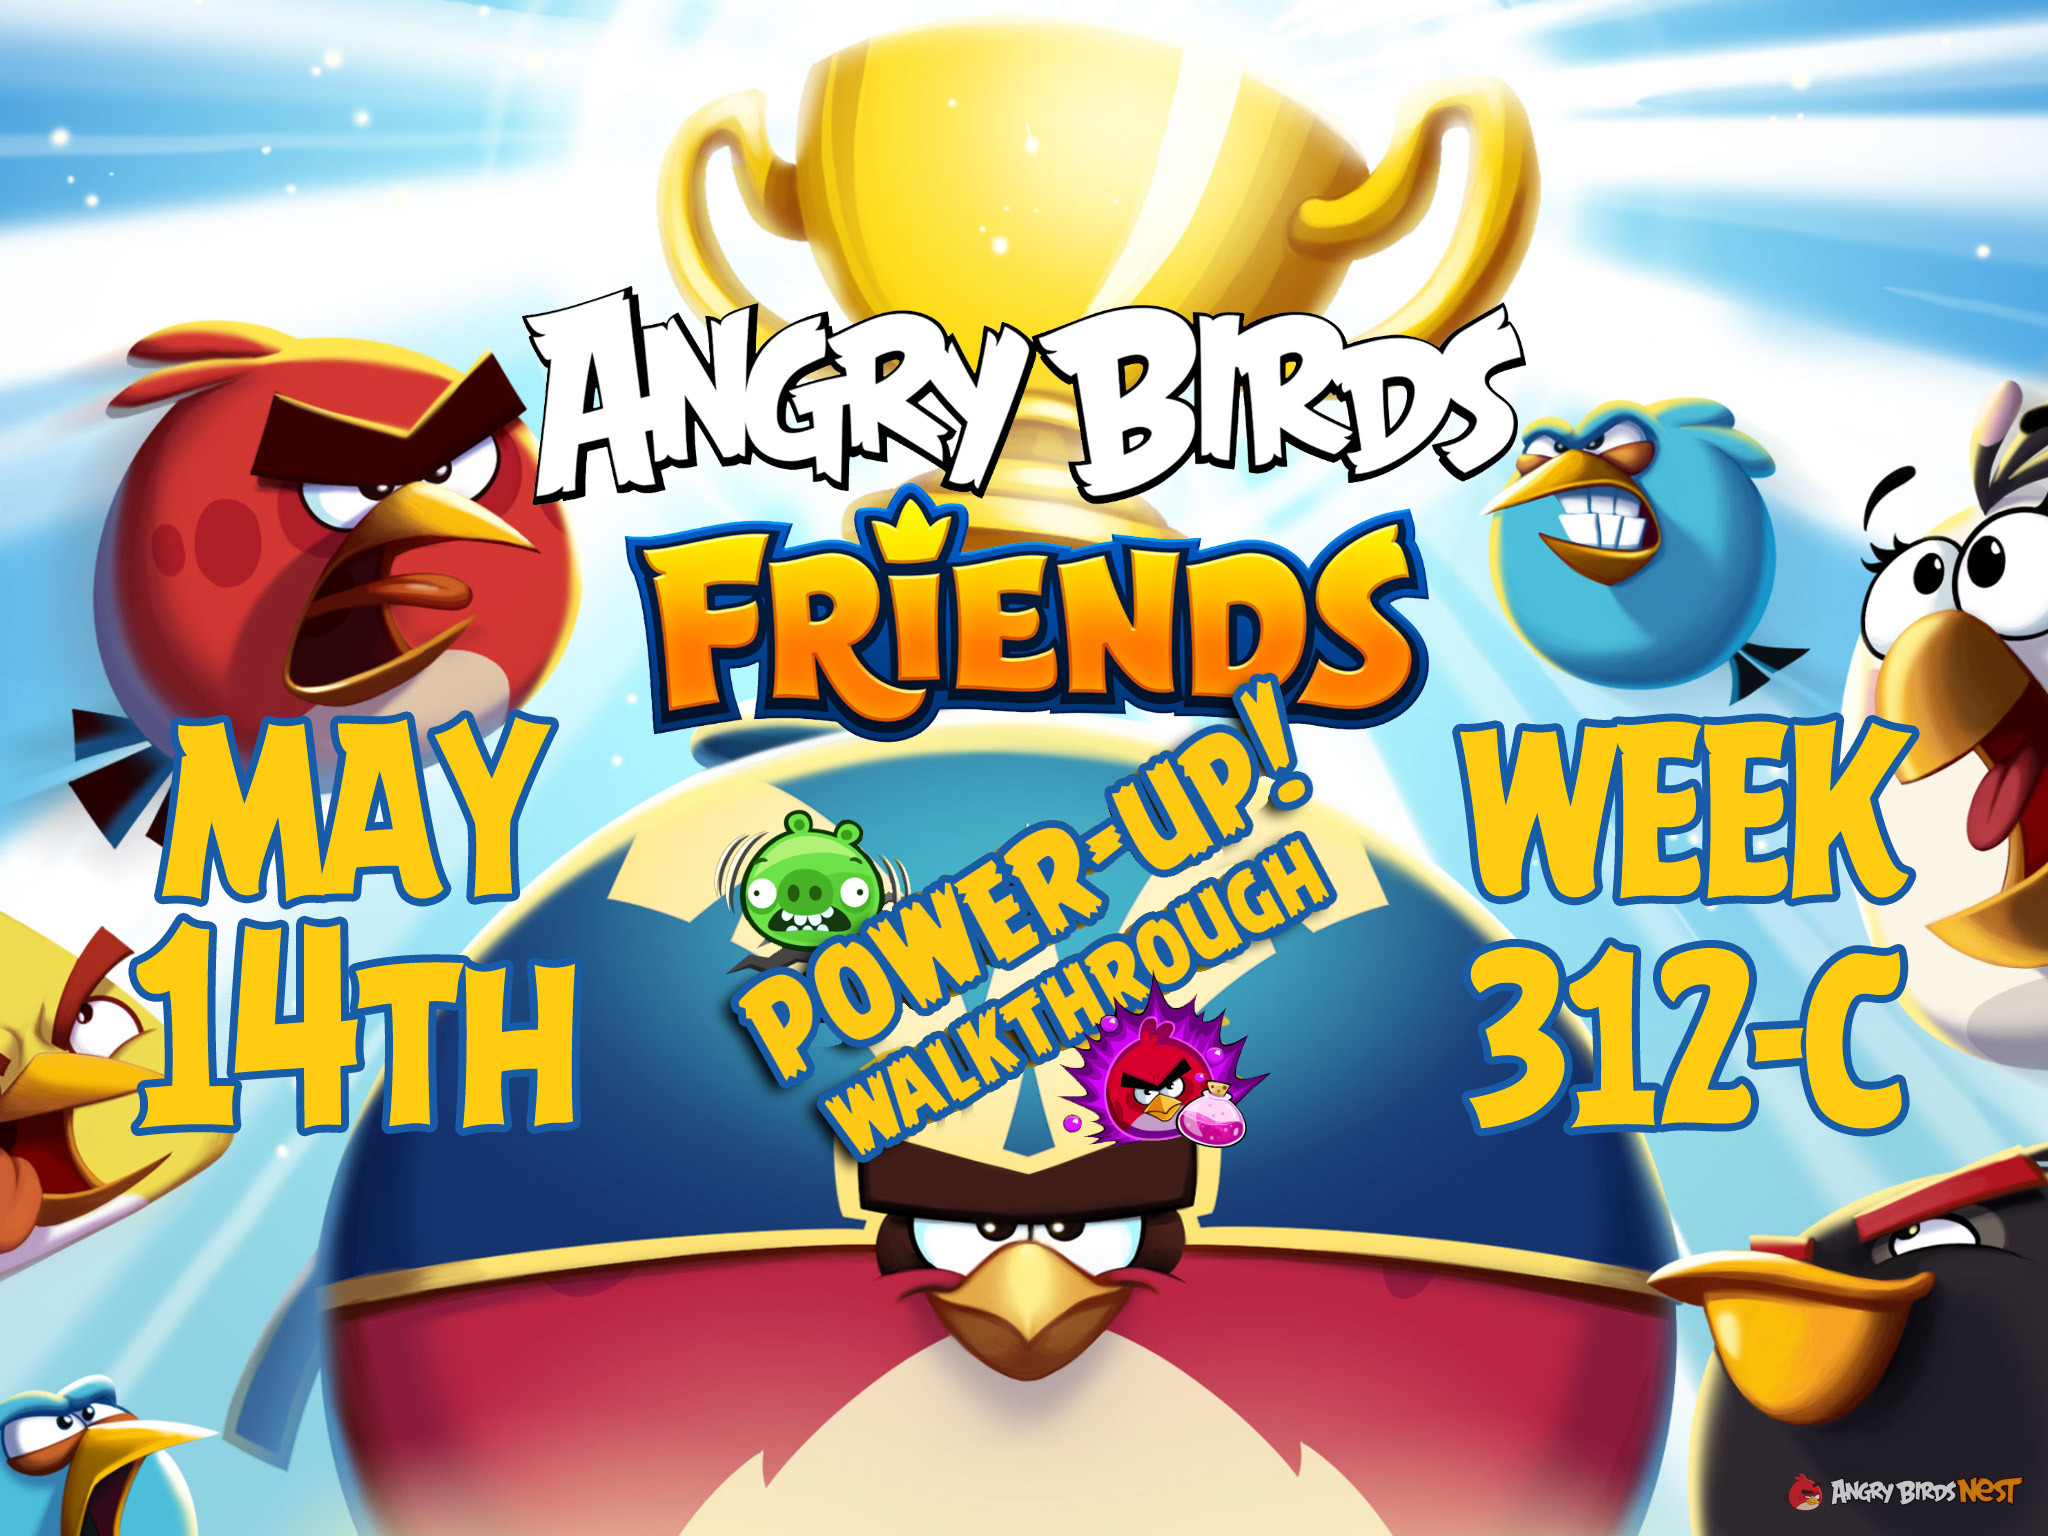 Angry Birds Friends Tournament Week 312-C Feature Image PU